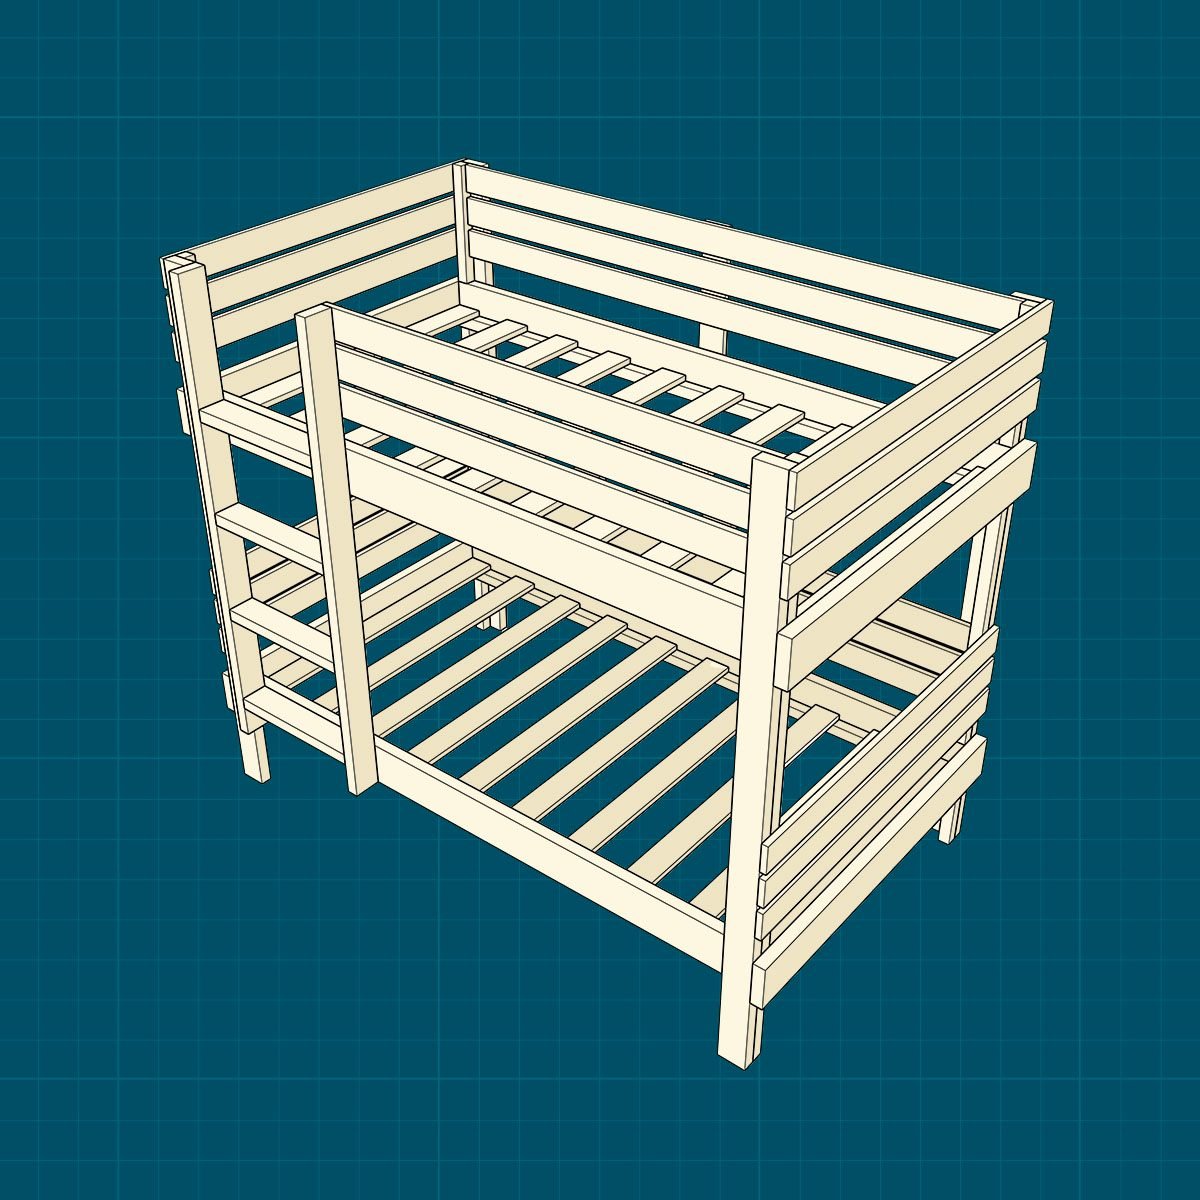 How To Build Bunk Beds